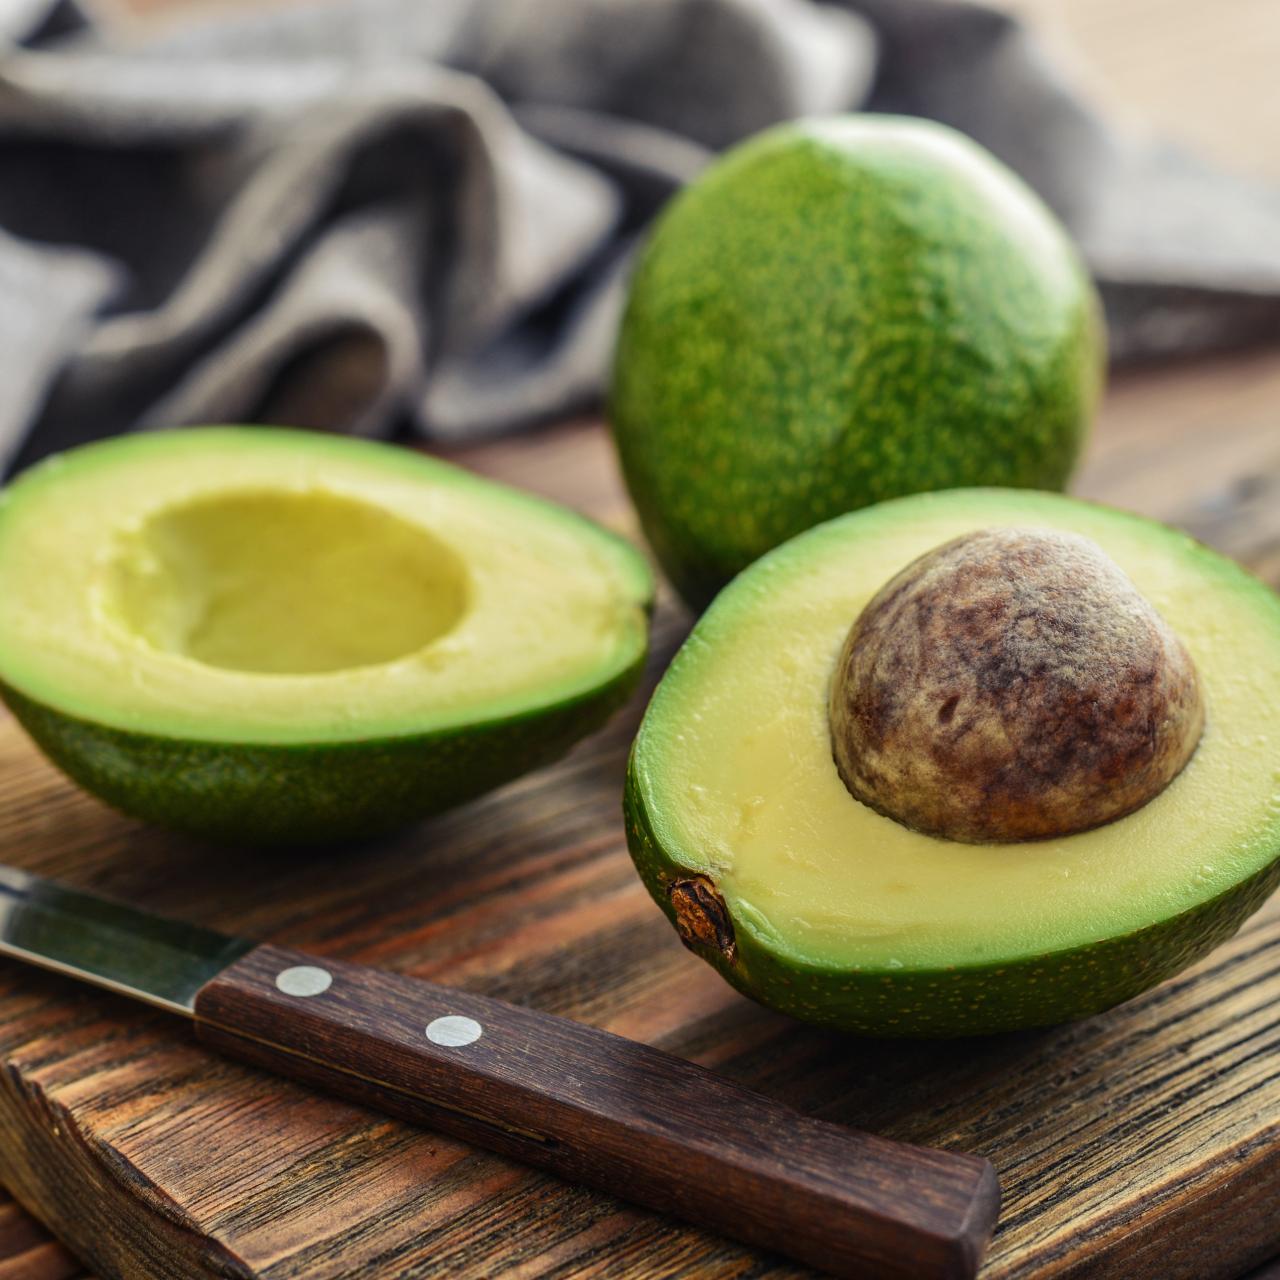 How to Ripen Avocados Fast Without Losing Flavor